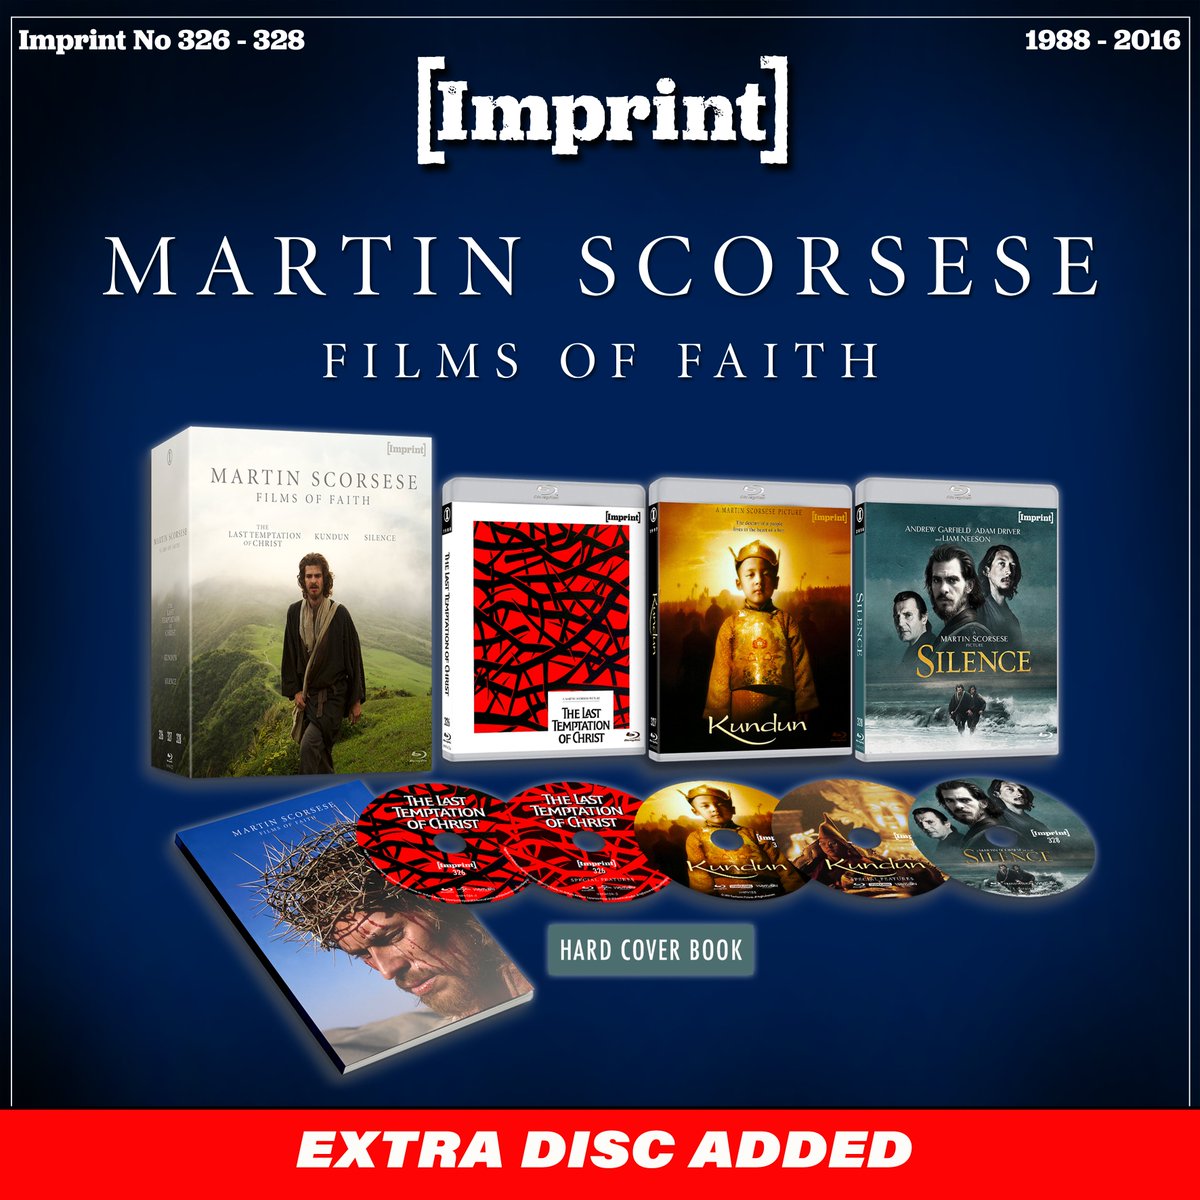 We are thrilled to announce an additional bonus disc for MARTIN SCORSESE: FILMS OF FAITH, adding brand NEW Special Features for The Last Temptation Of Christ!🩸 The two bonus discs for The Last Temptation... & Kundun will NOT be included in any Standard Edition of this set.